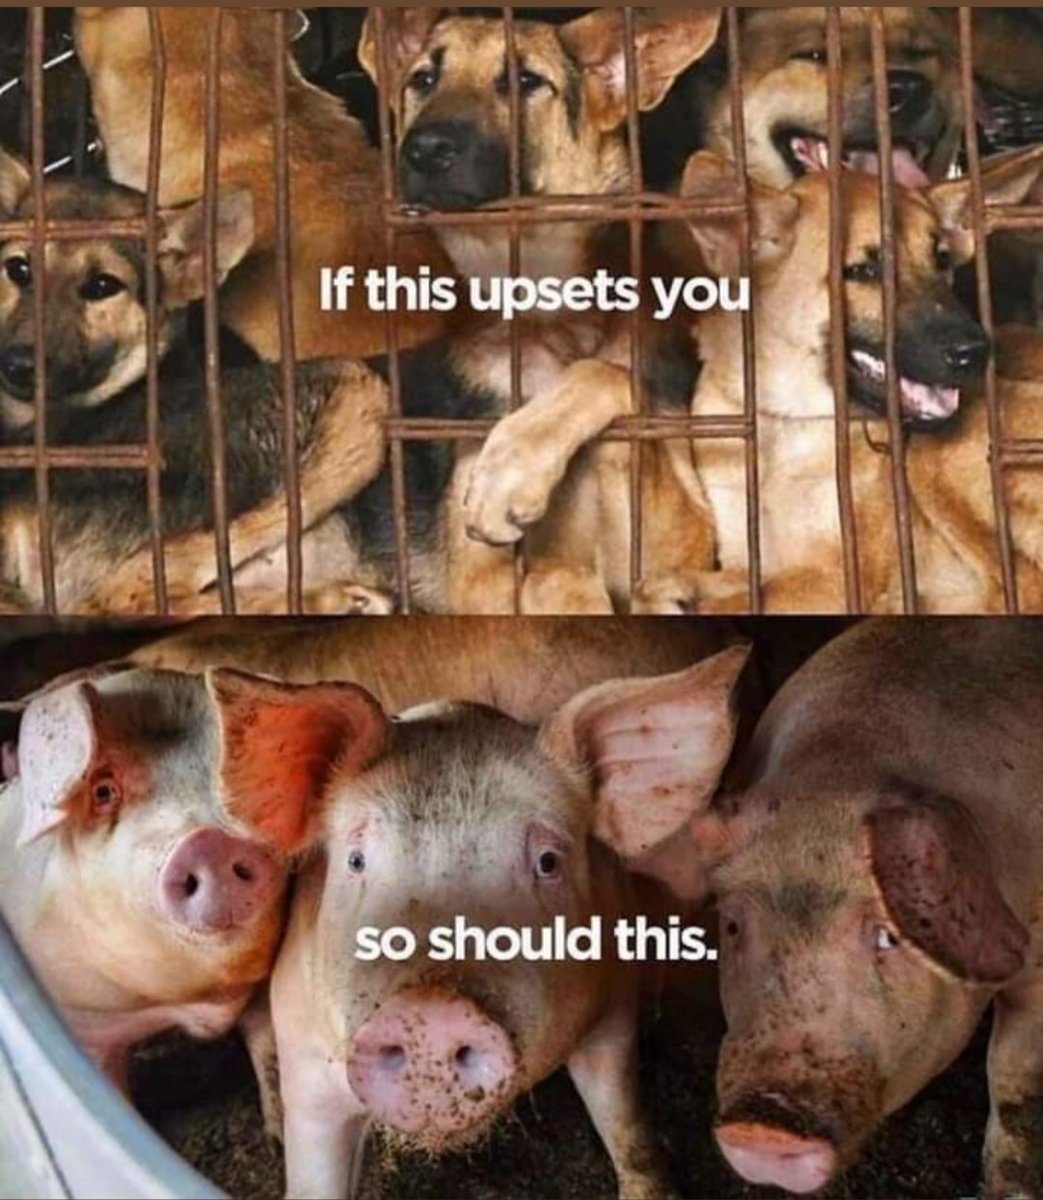 You can't say you're an Animal Lover if you get upset by the top picture but not the bottom 😔😔😔 
All animals deserve to live a happy and healthy life 💚❤ #vegan #veganfortheanimals #lovealllife #animalswanttolive #bekindtoallkind